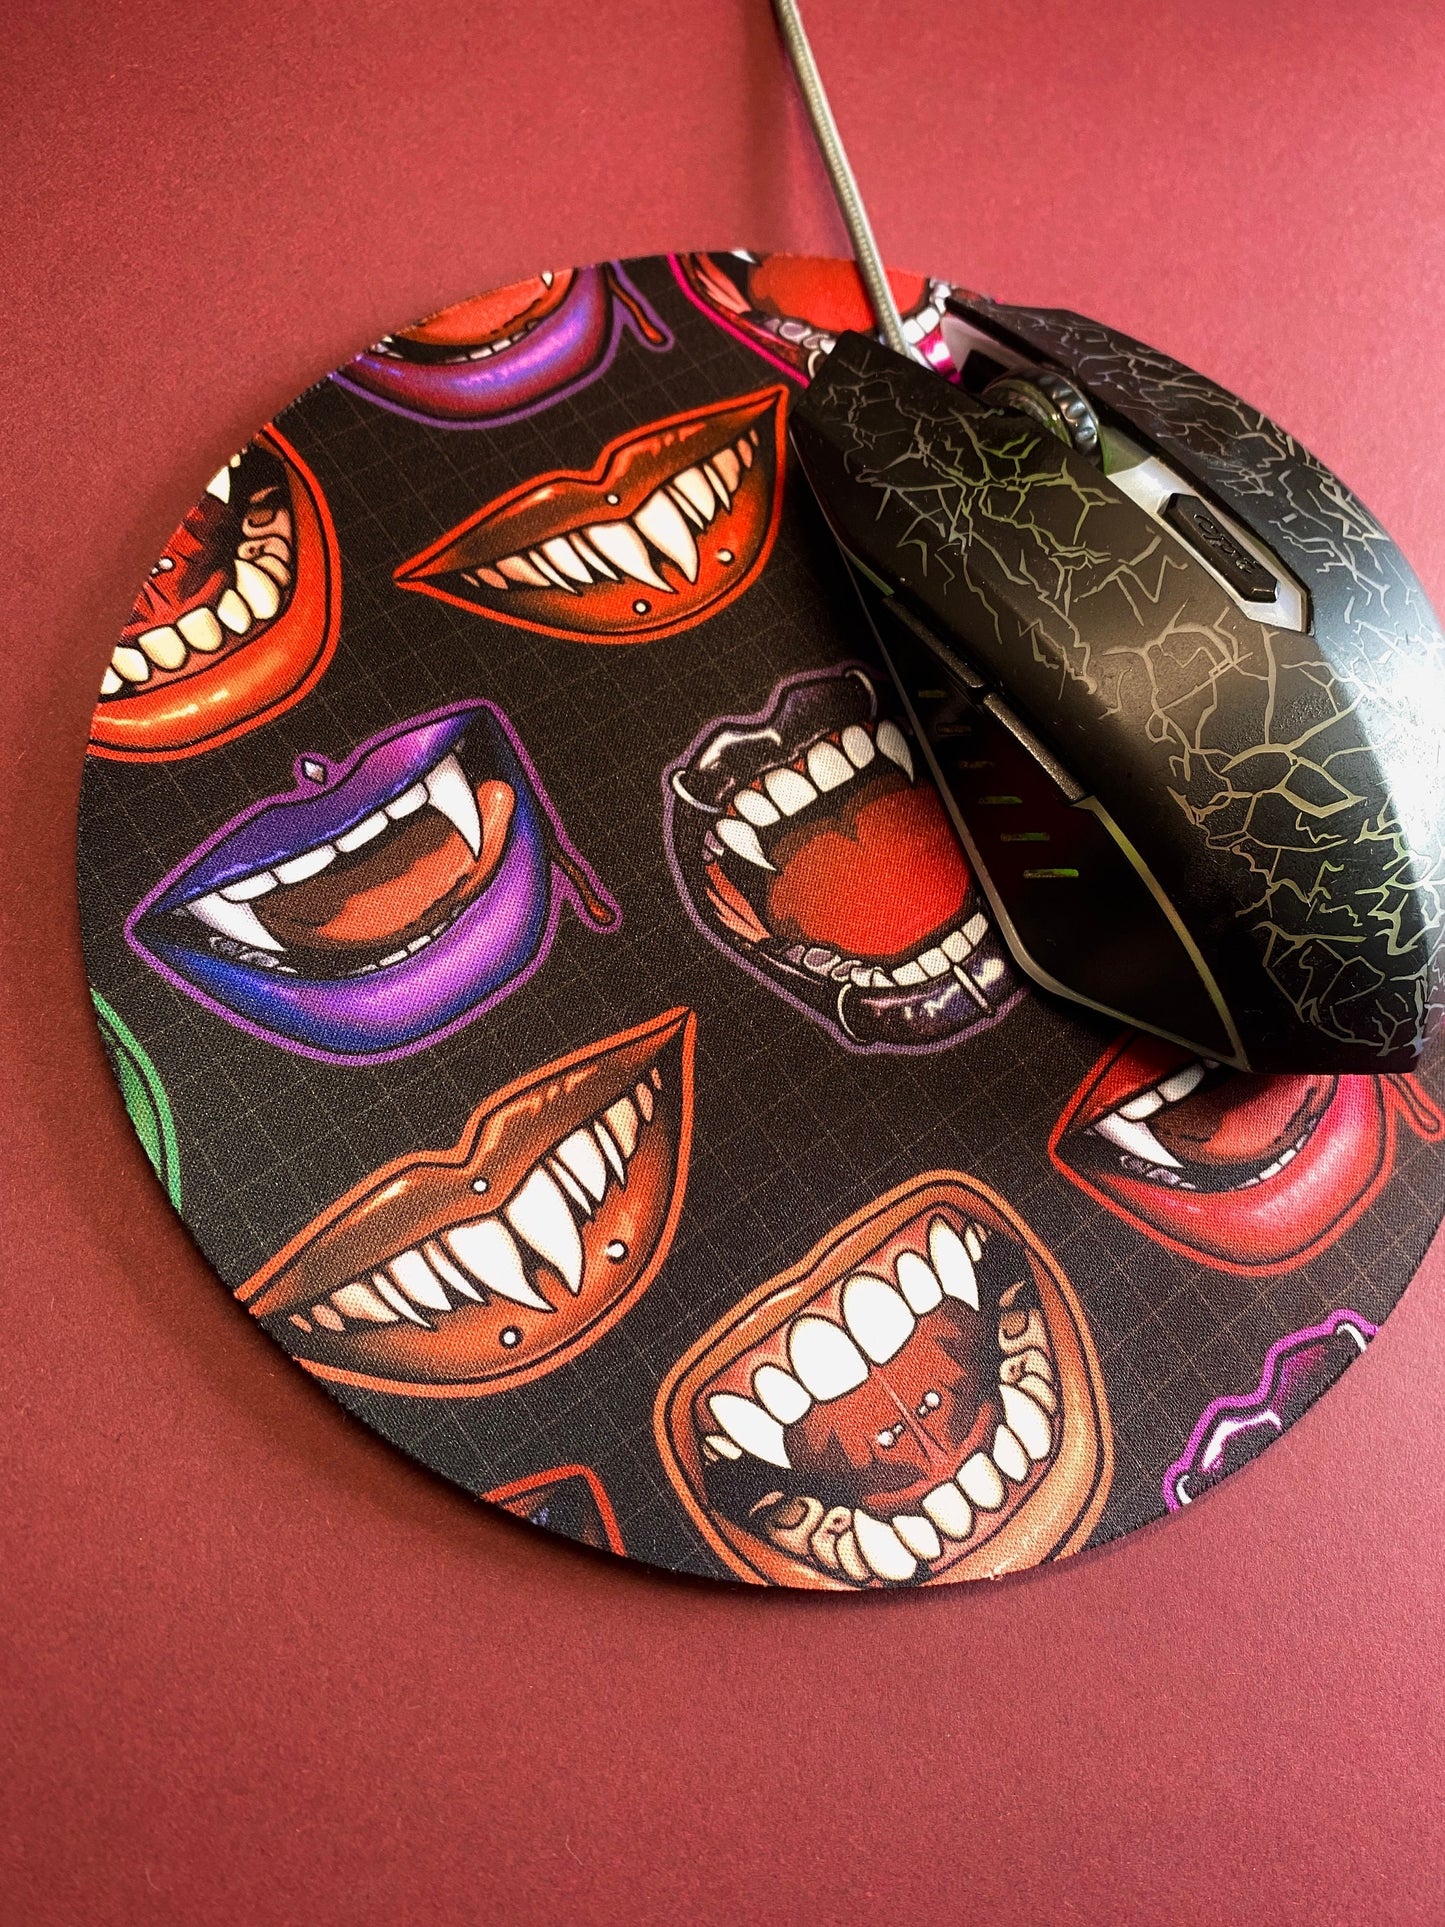 Fangs Mouse Pad - Round Mouse Mat | Desk Accessories | Work Home Computer Mousepad